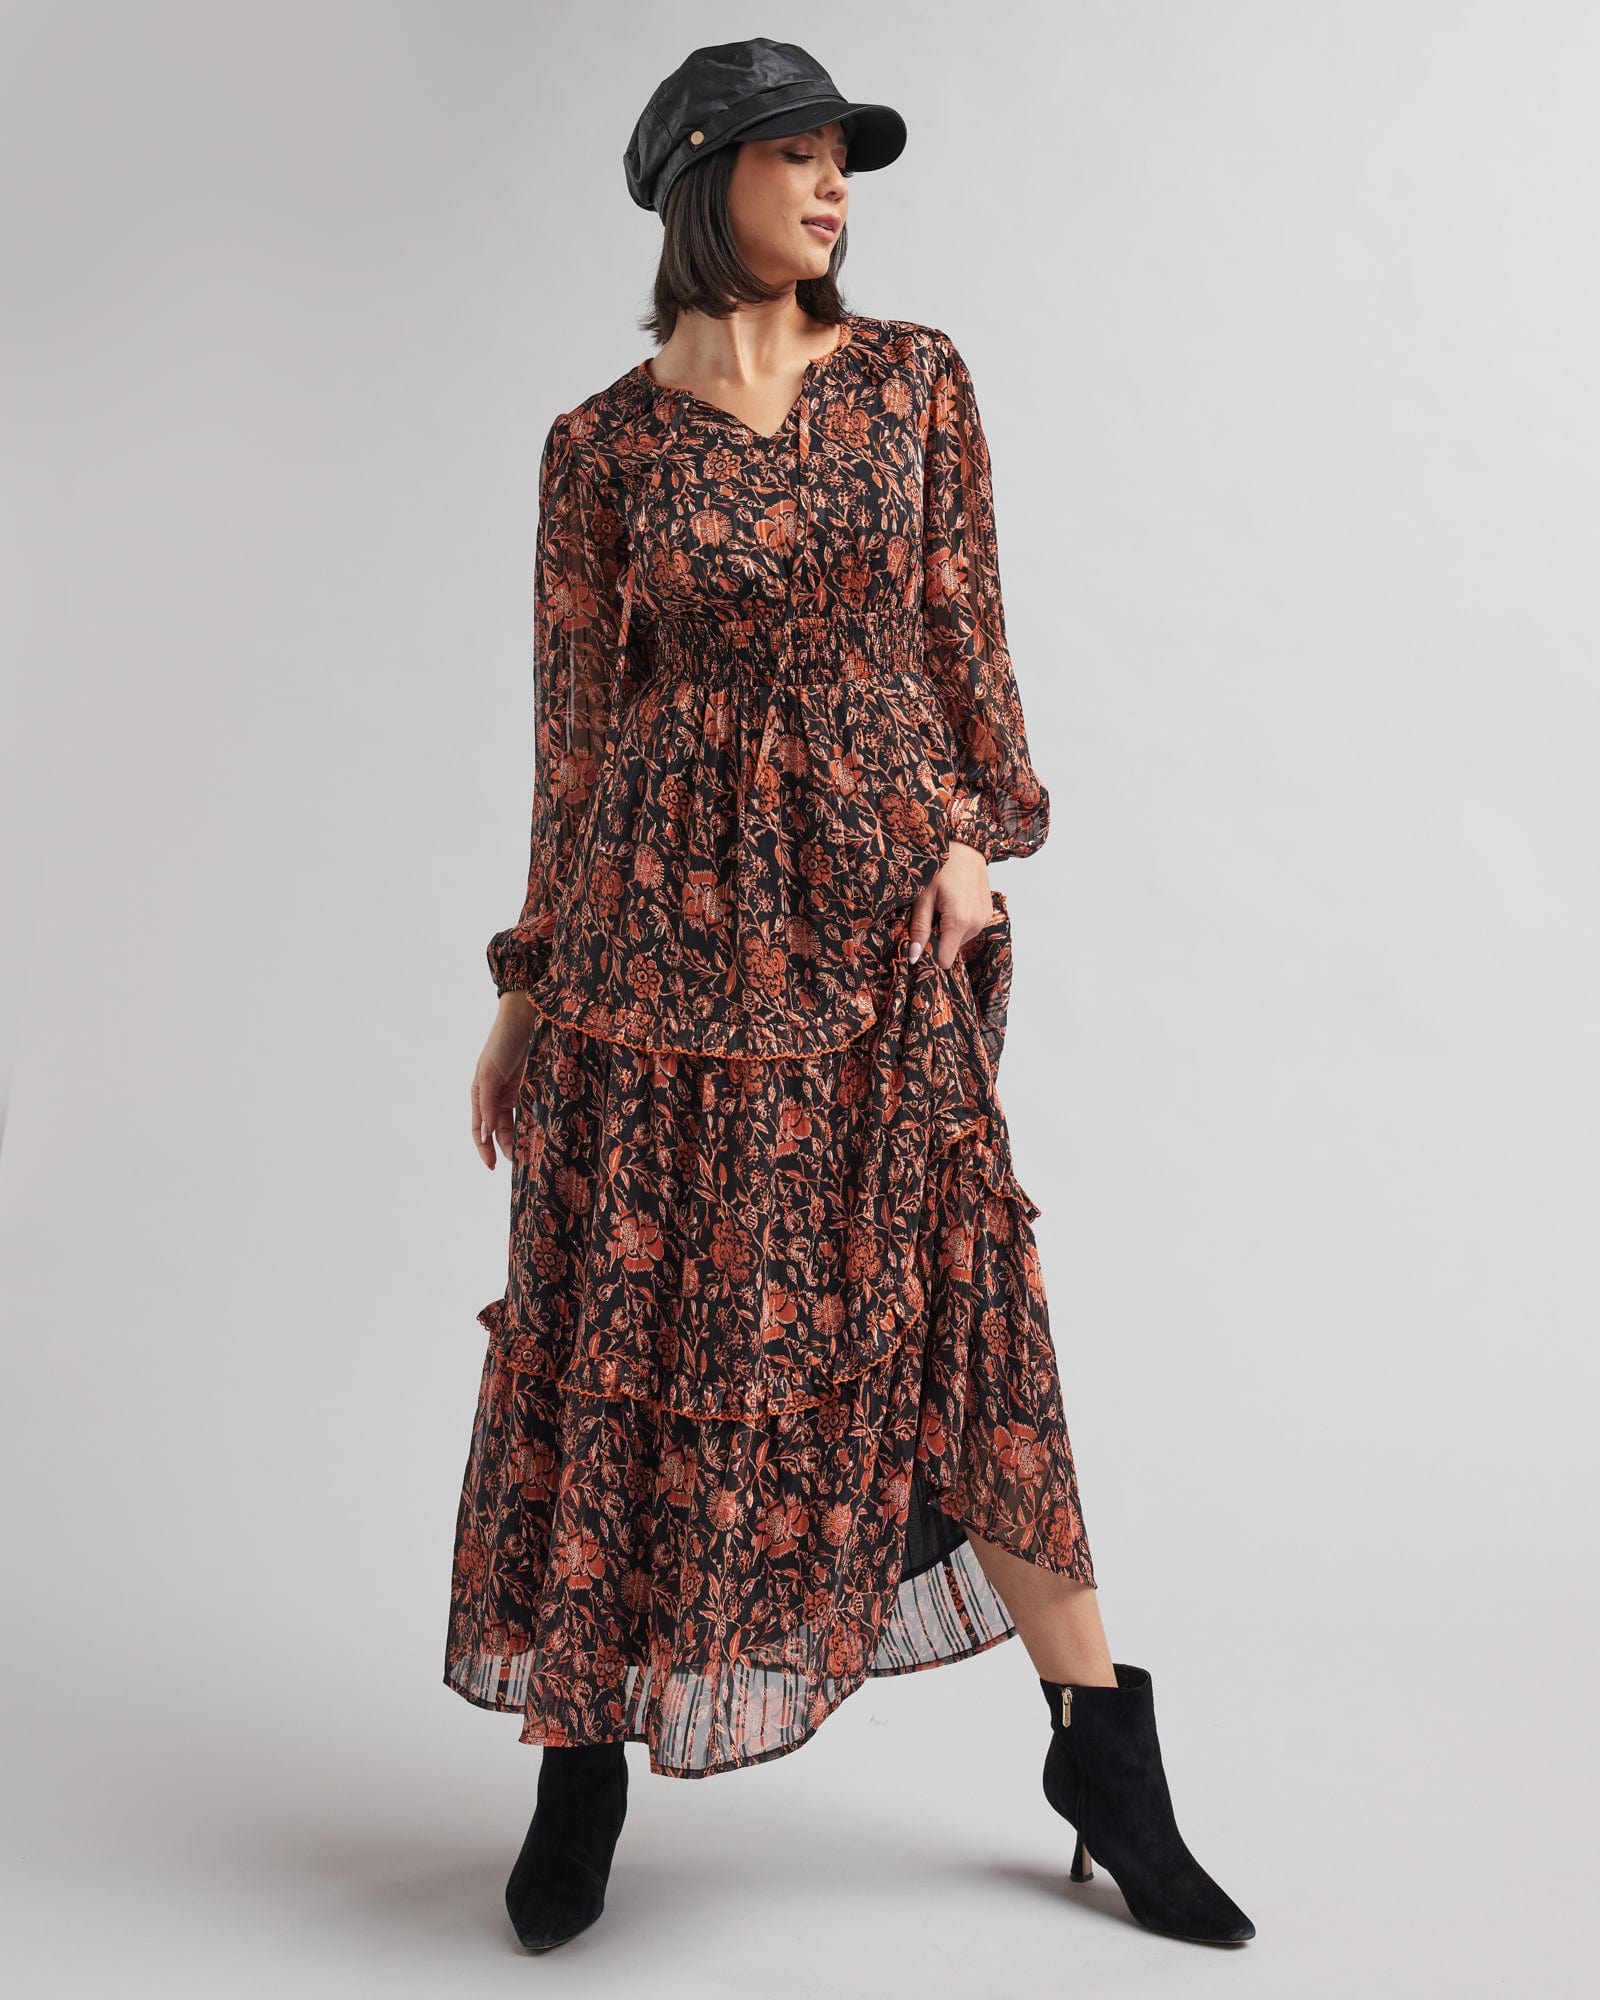 Woman in a long sleeve, maxi length, black and orange floral print dress